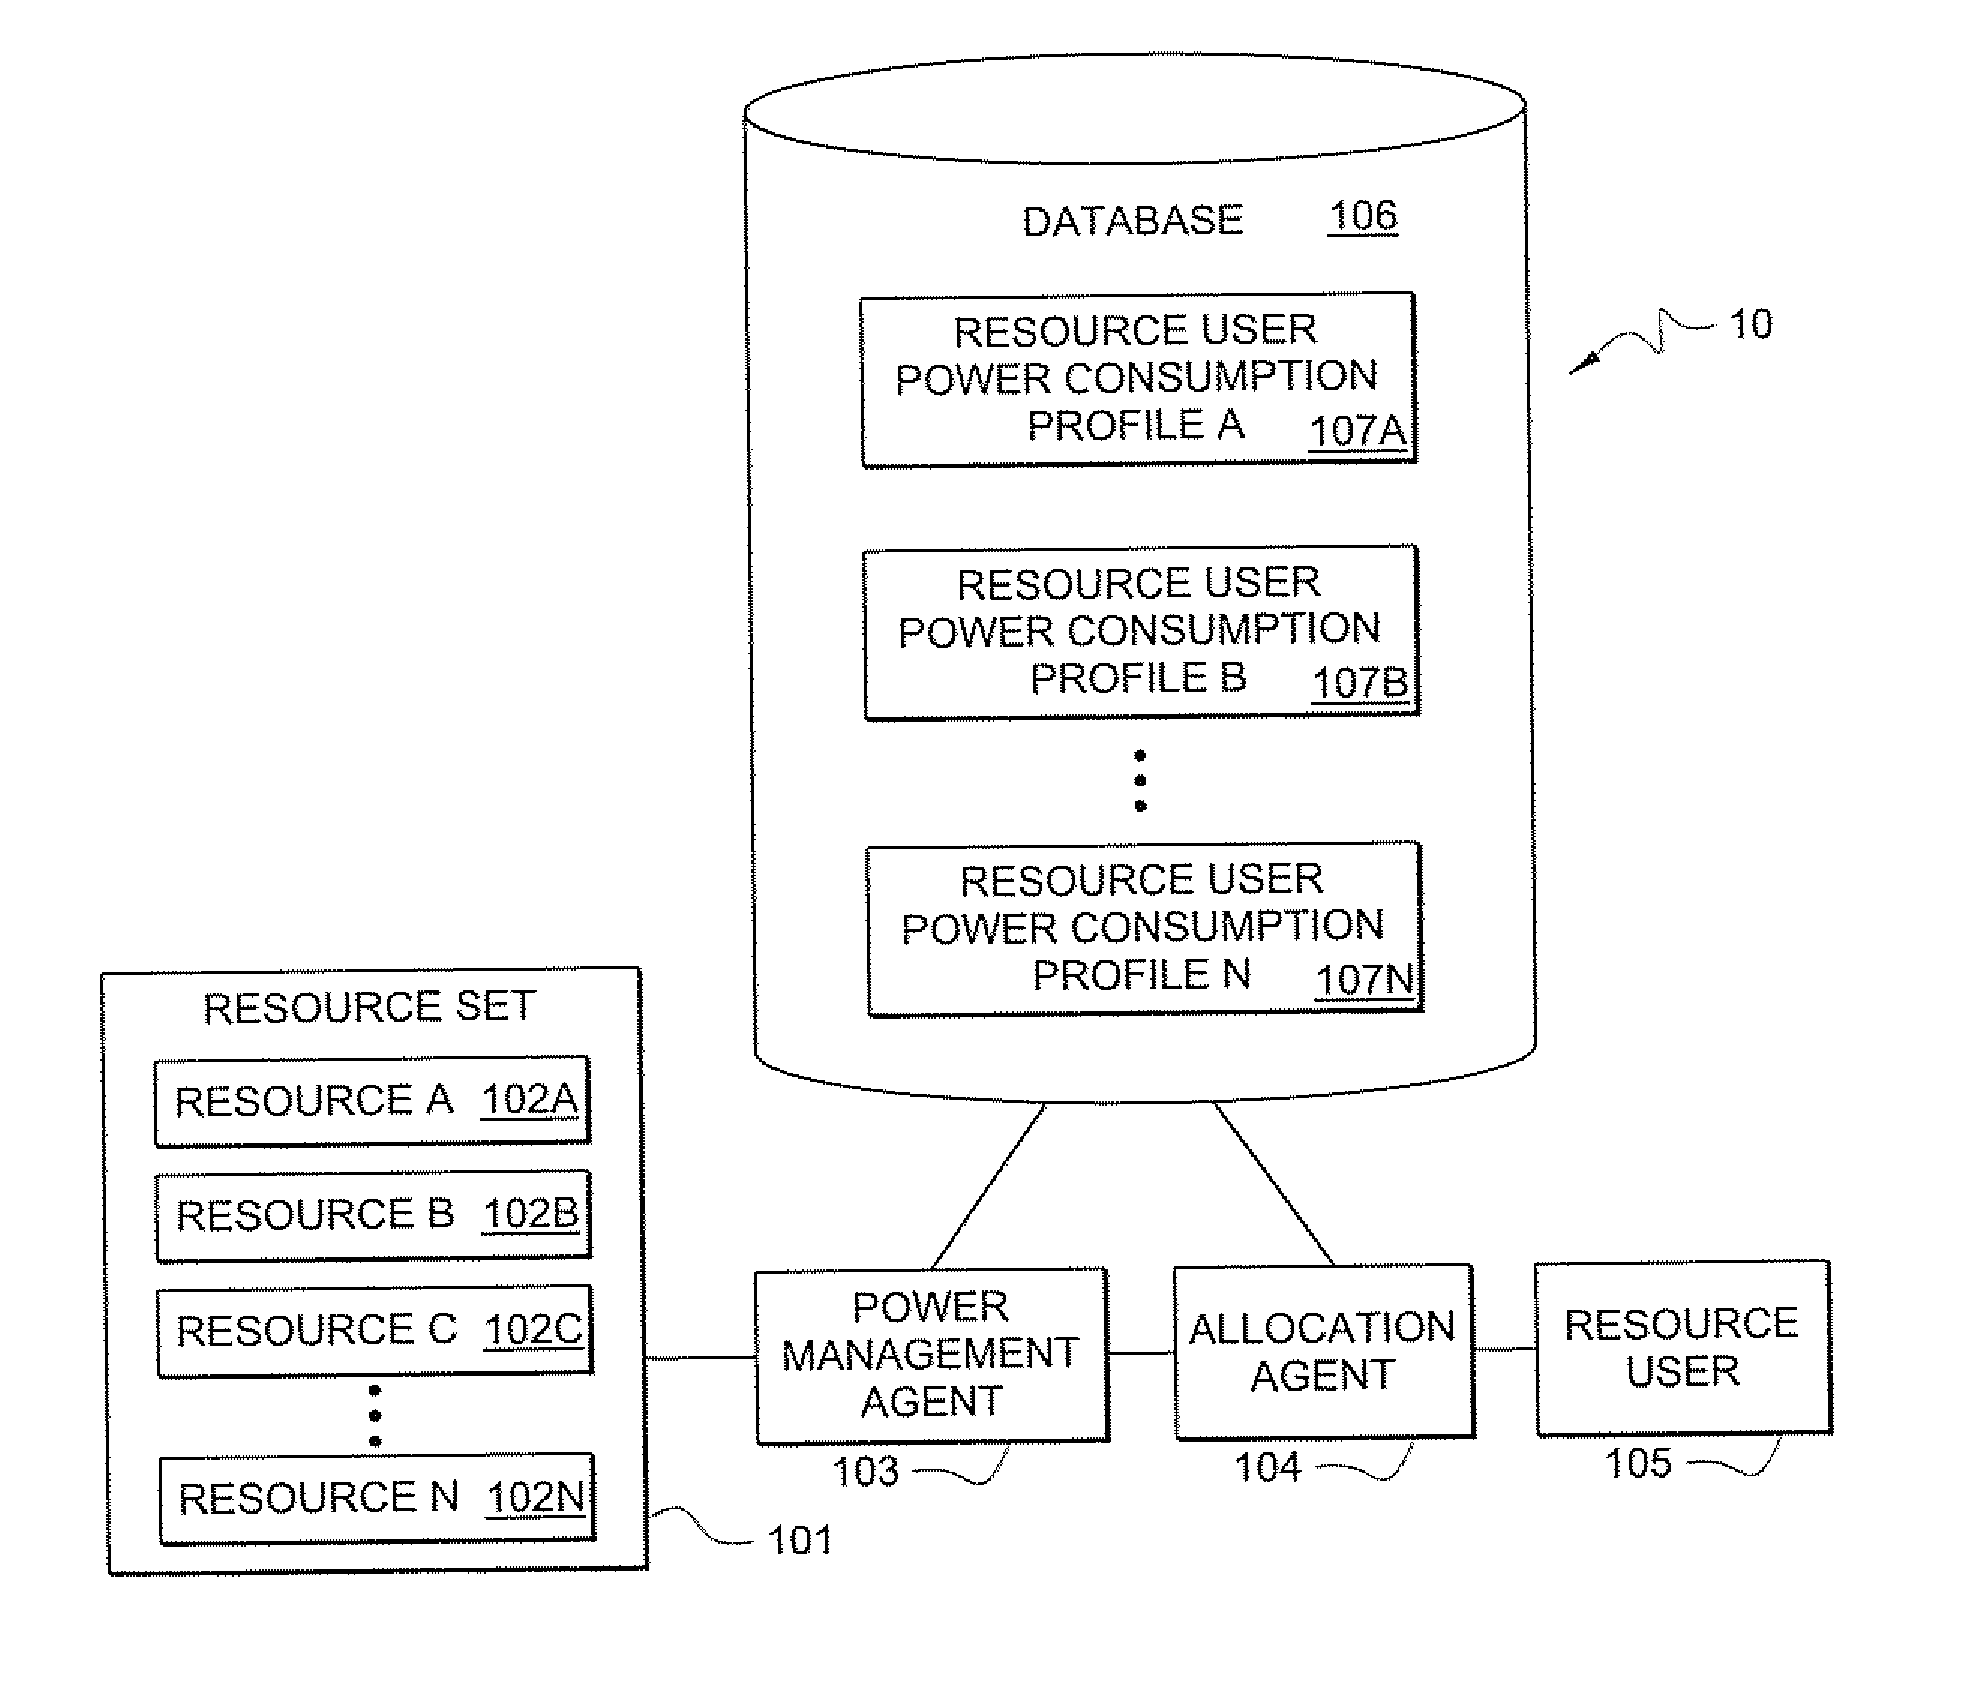 Systems and methods for determining power consumption profiles for resource users and using the profiles for resource allocation